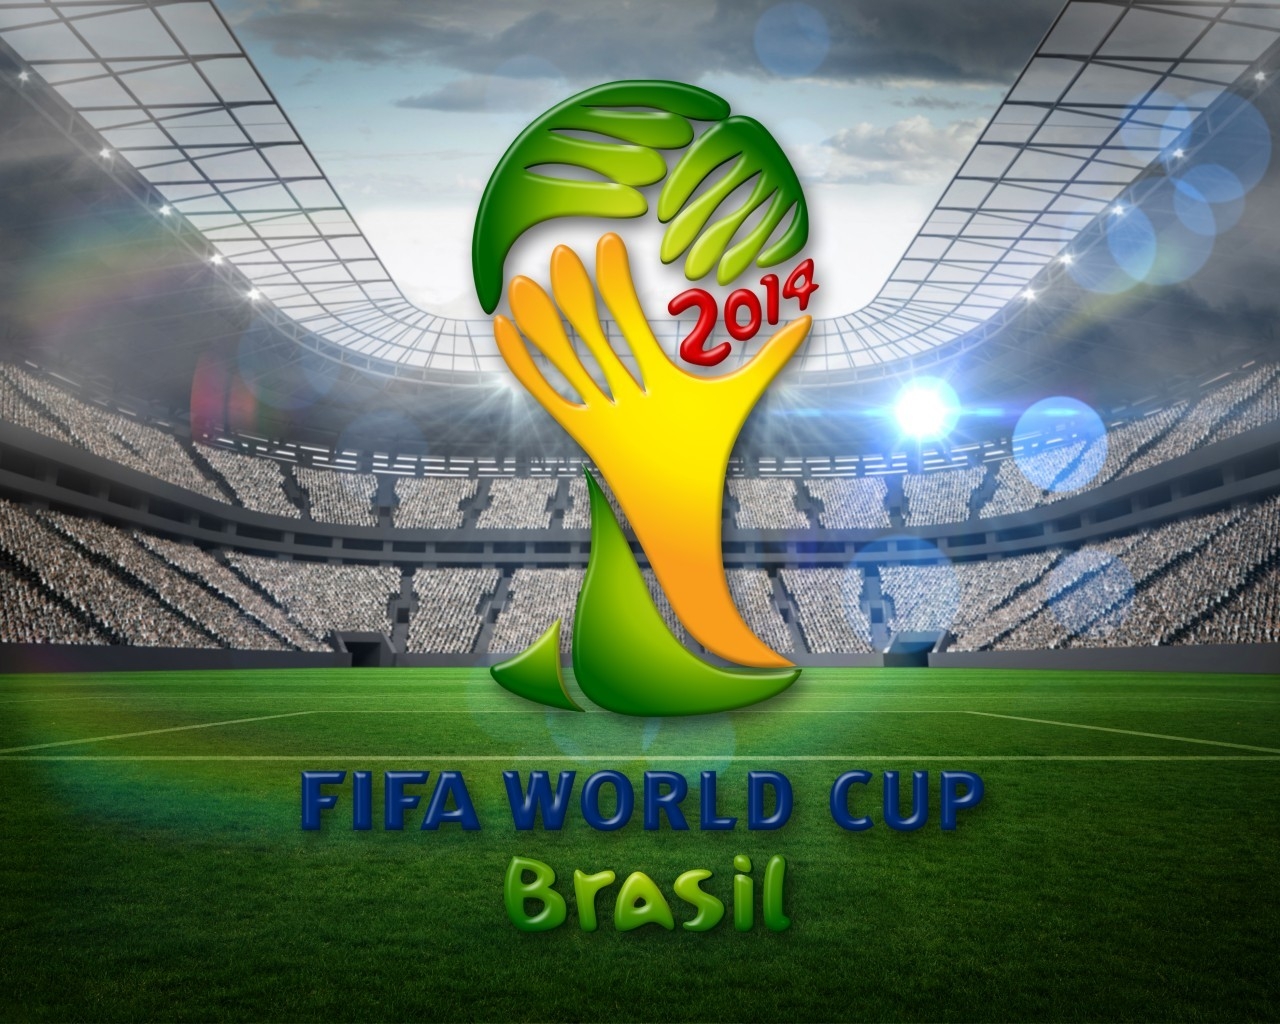 2014 Brasil World Cup for 1280 x 1024 resolution